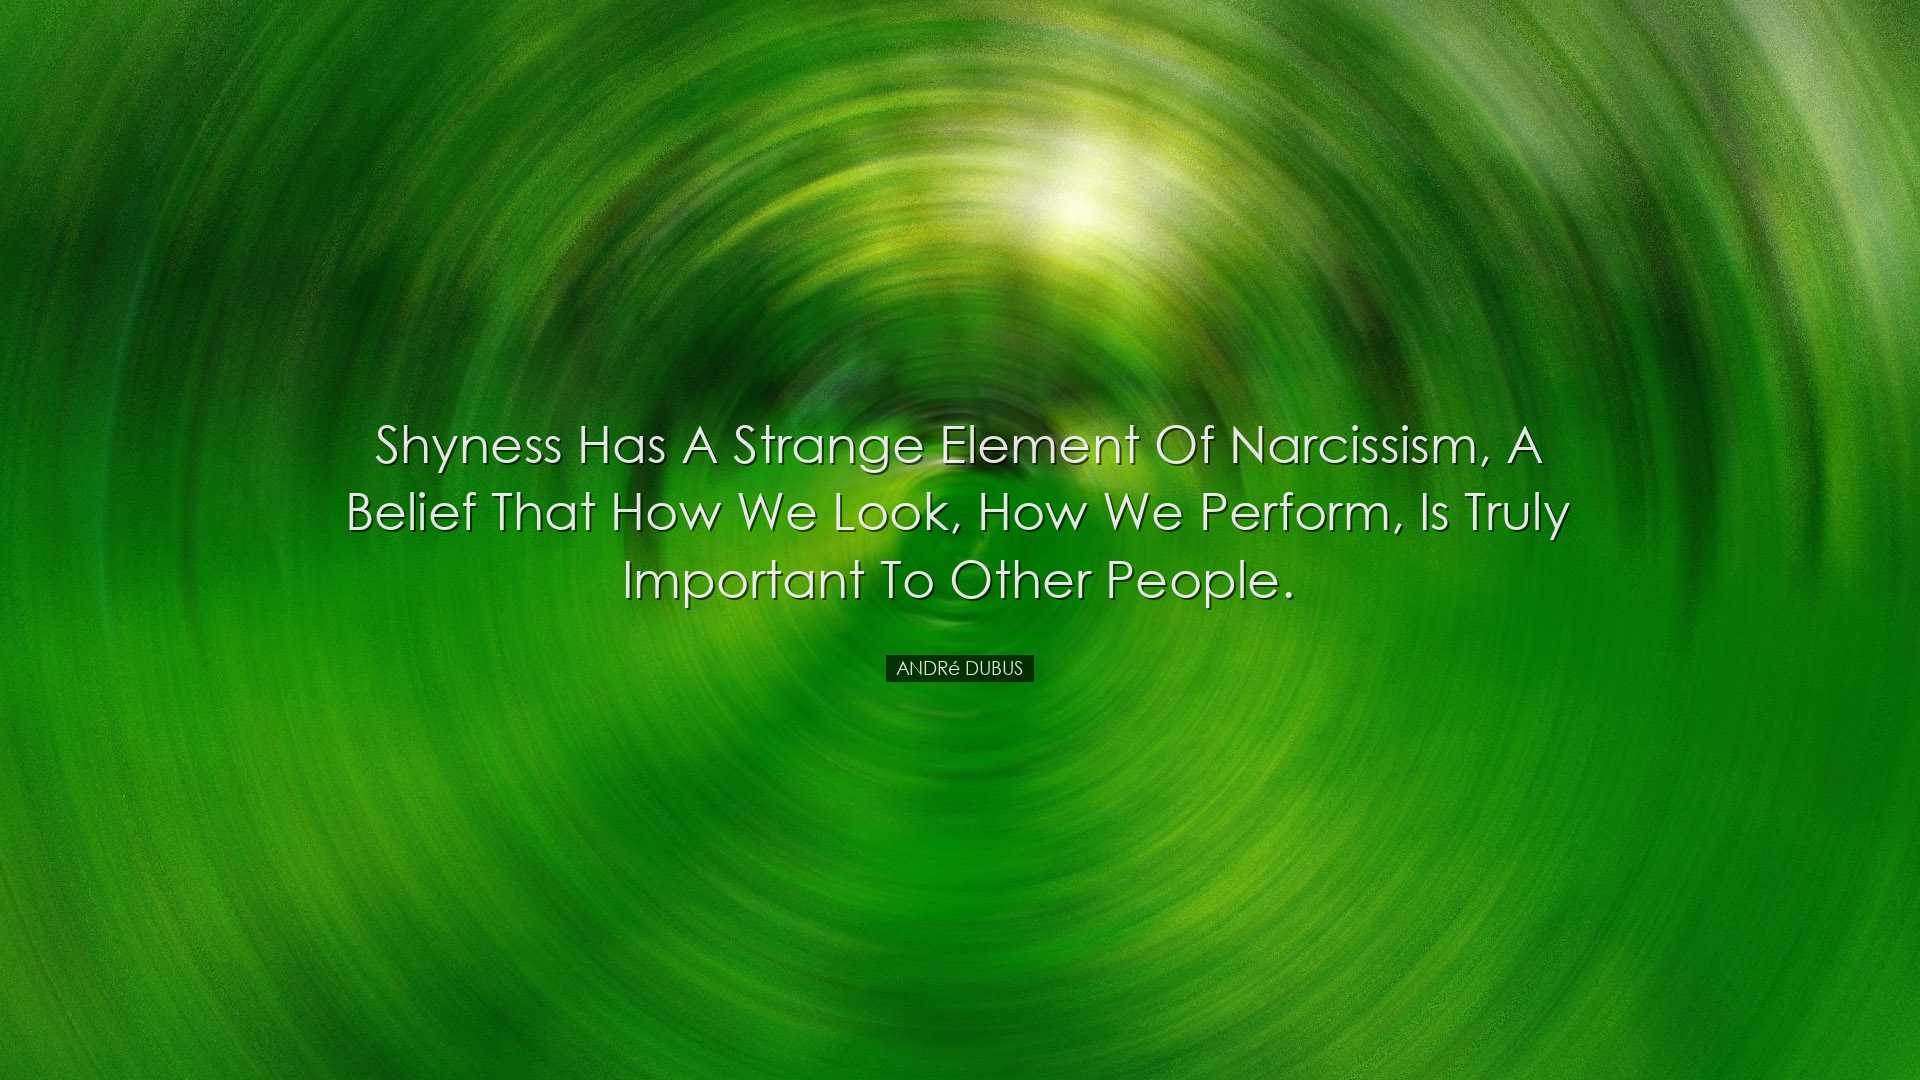 Shyness has a strange element of narcissism, a belief that how we